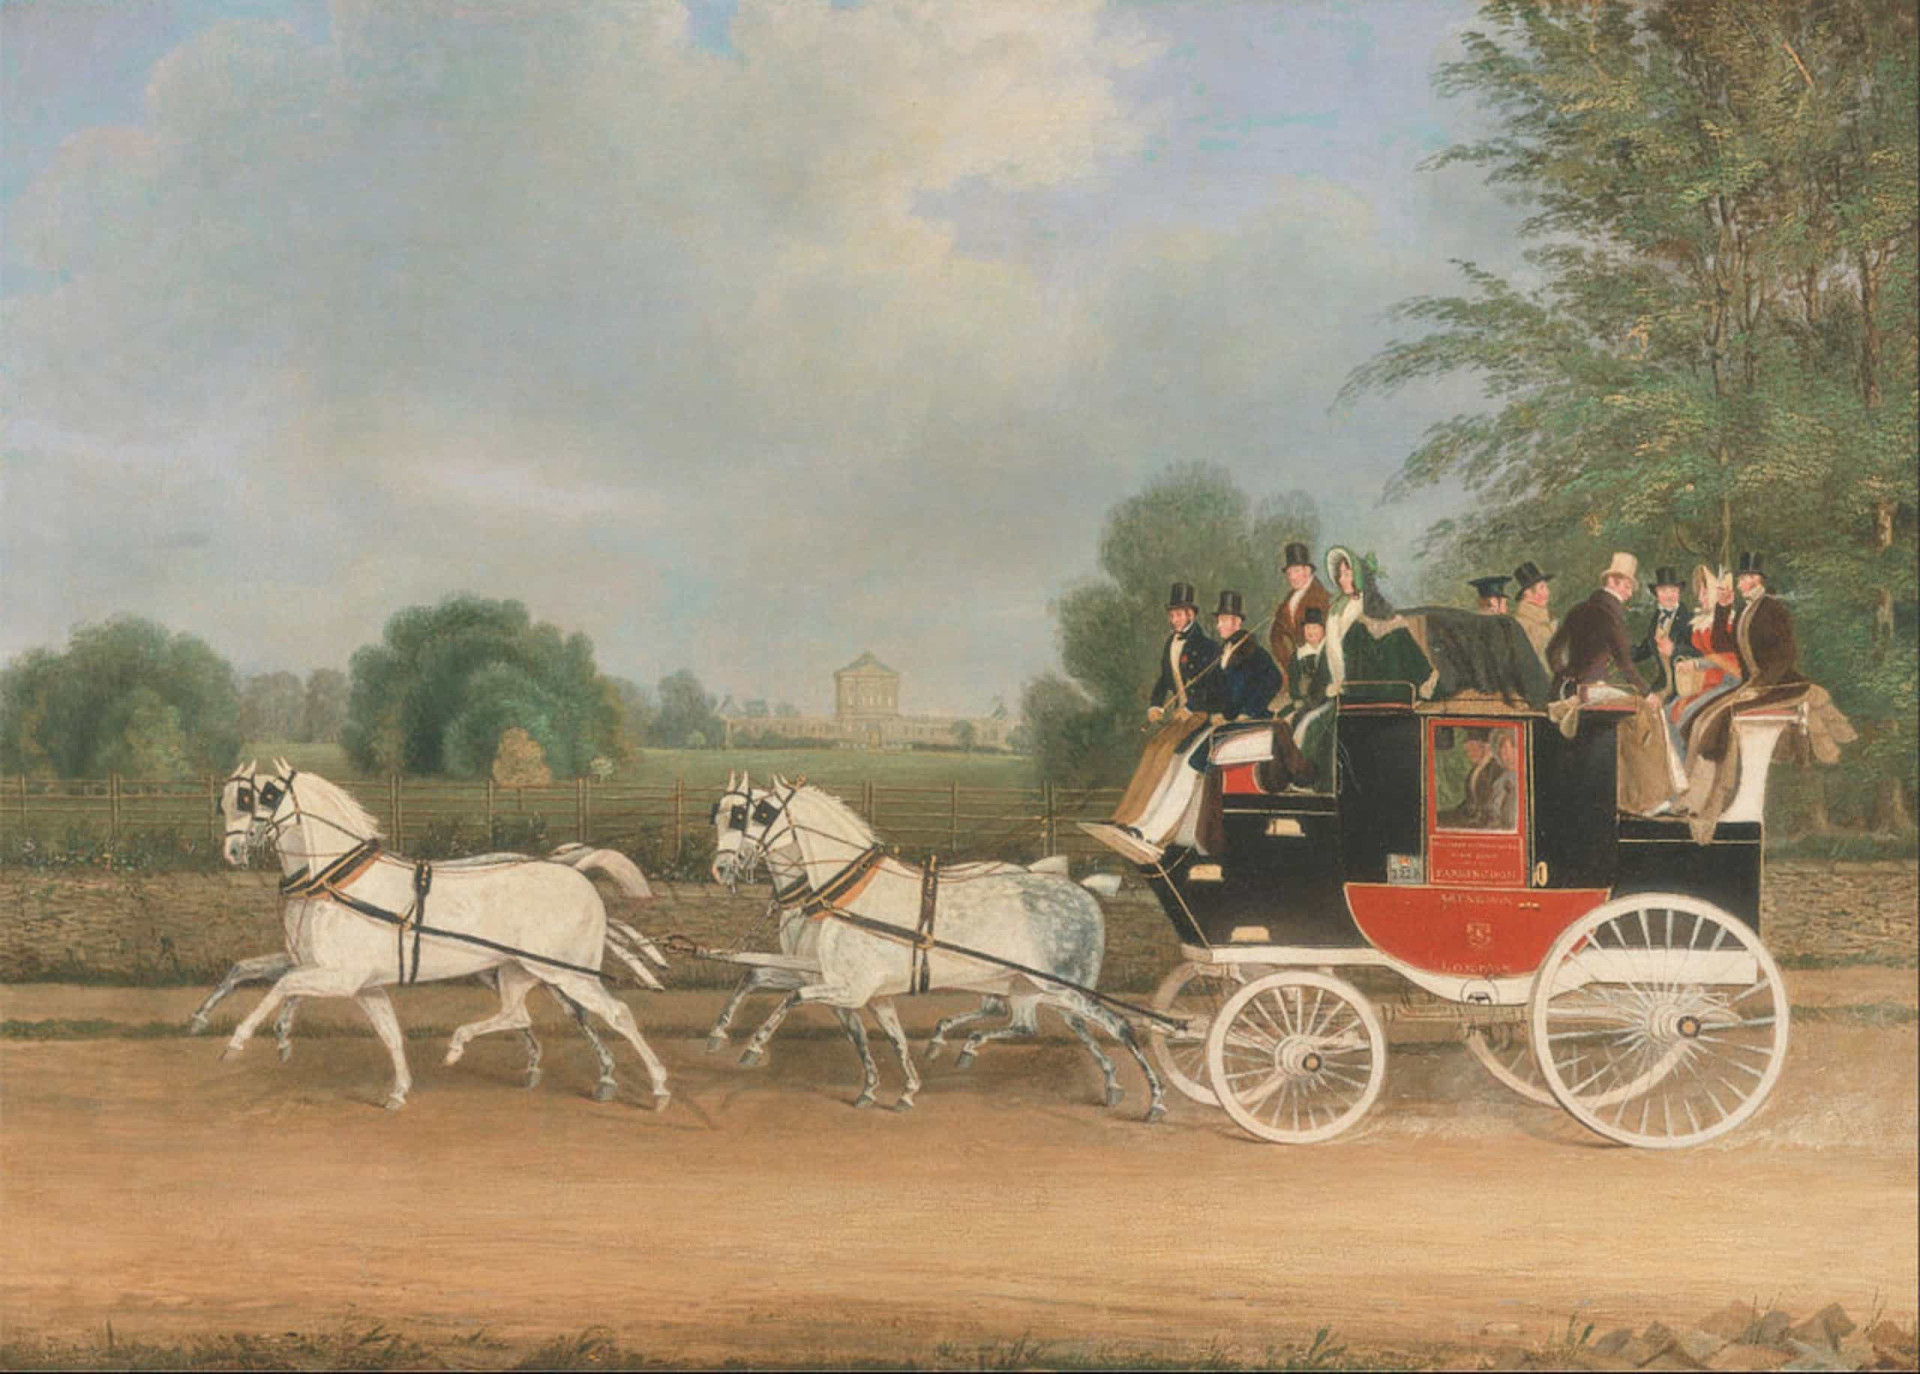 <p>In the 18th and 19th centuries, a wide variety of carriage types were in common use throughout Europe. In Britain, districts in large cities were increasingly being connected by horse-drawn coach. A short but popular route was the City of London-Farringdon service, inaugurated in 1835.</p><p>You may also like:<a href="https://www.starsinsider.com/n/238071?utm_source=msn.com&utm_medium=display&utm_campaign=referral_description&utm_content=516219v1en-us"> Banned baby names in Australia</a></p>